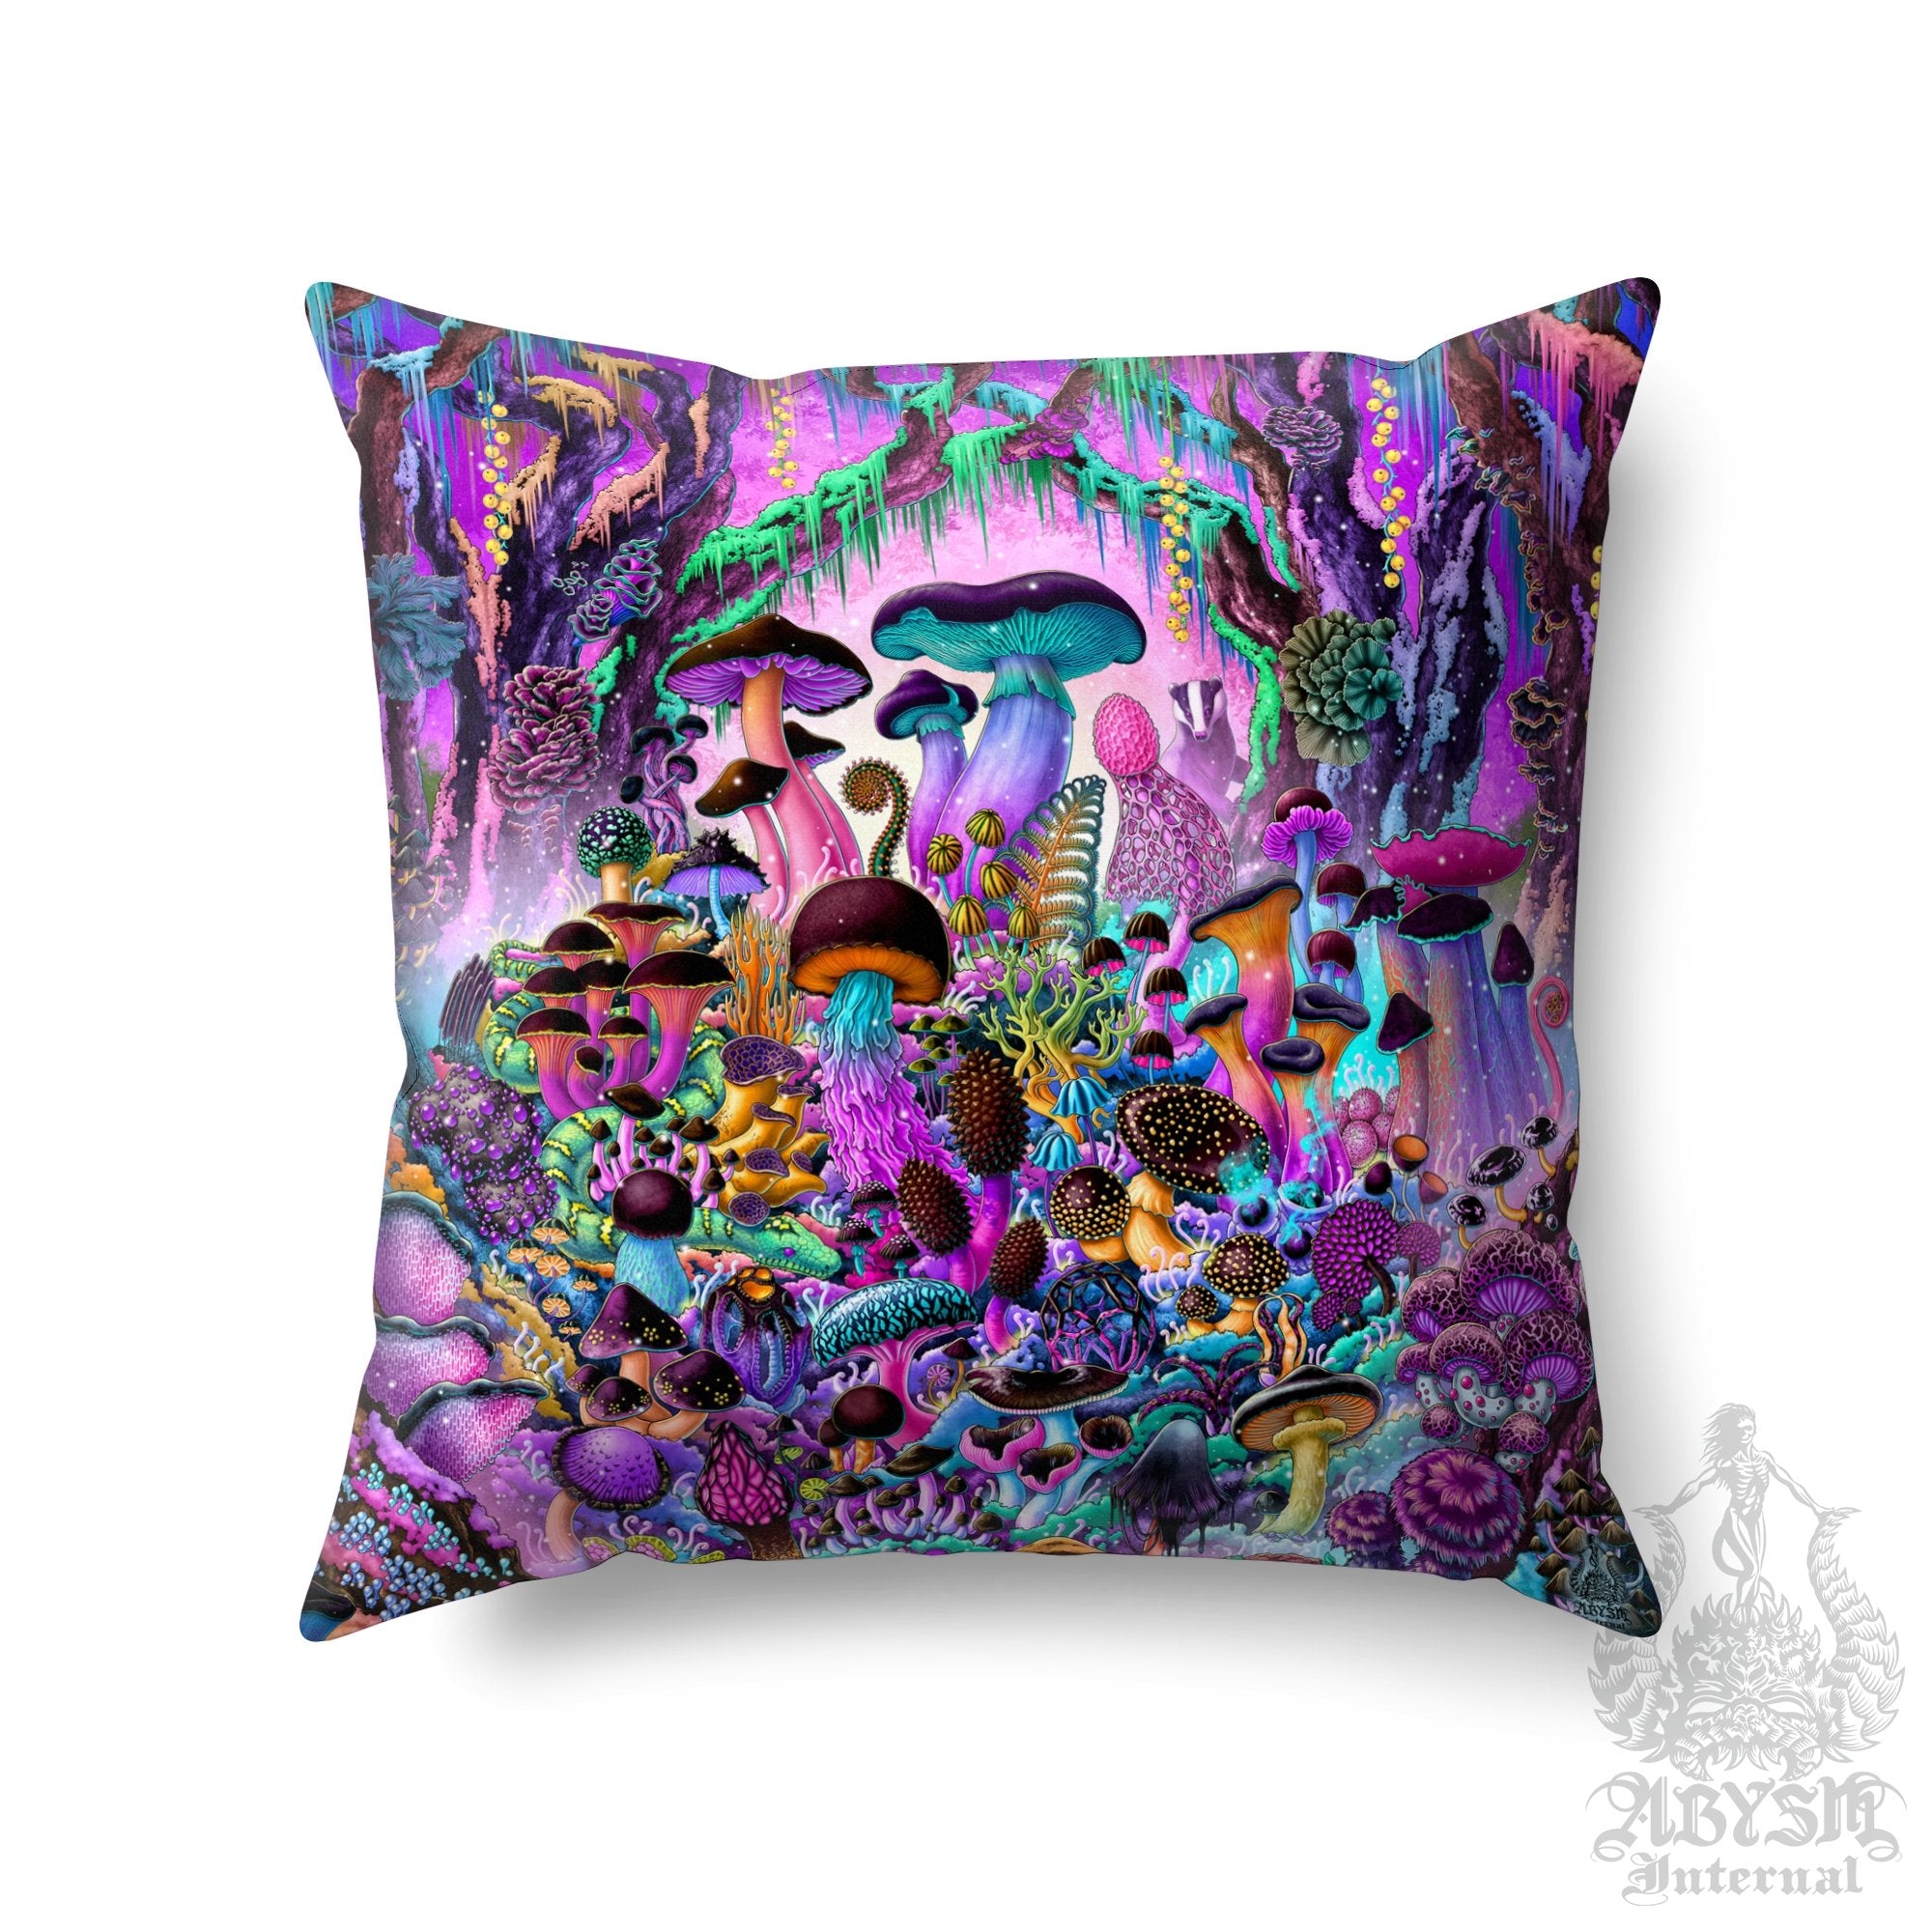 Mushrooms Throw Pillow, Aesthetic Decorative Accent Cushion, Psychedelic Room Decor, Magic Shrooms Art Print - Pastel Black - Abysm Internal